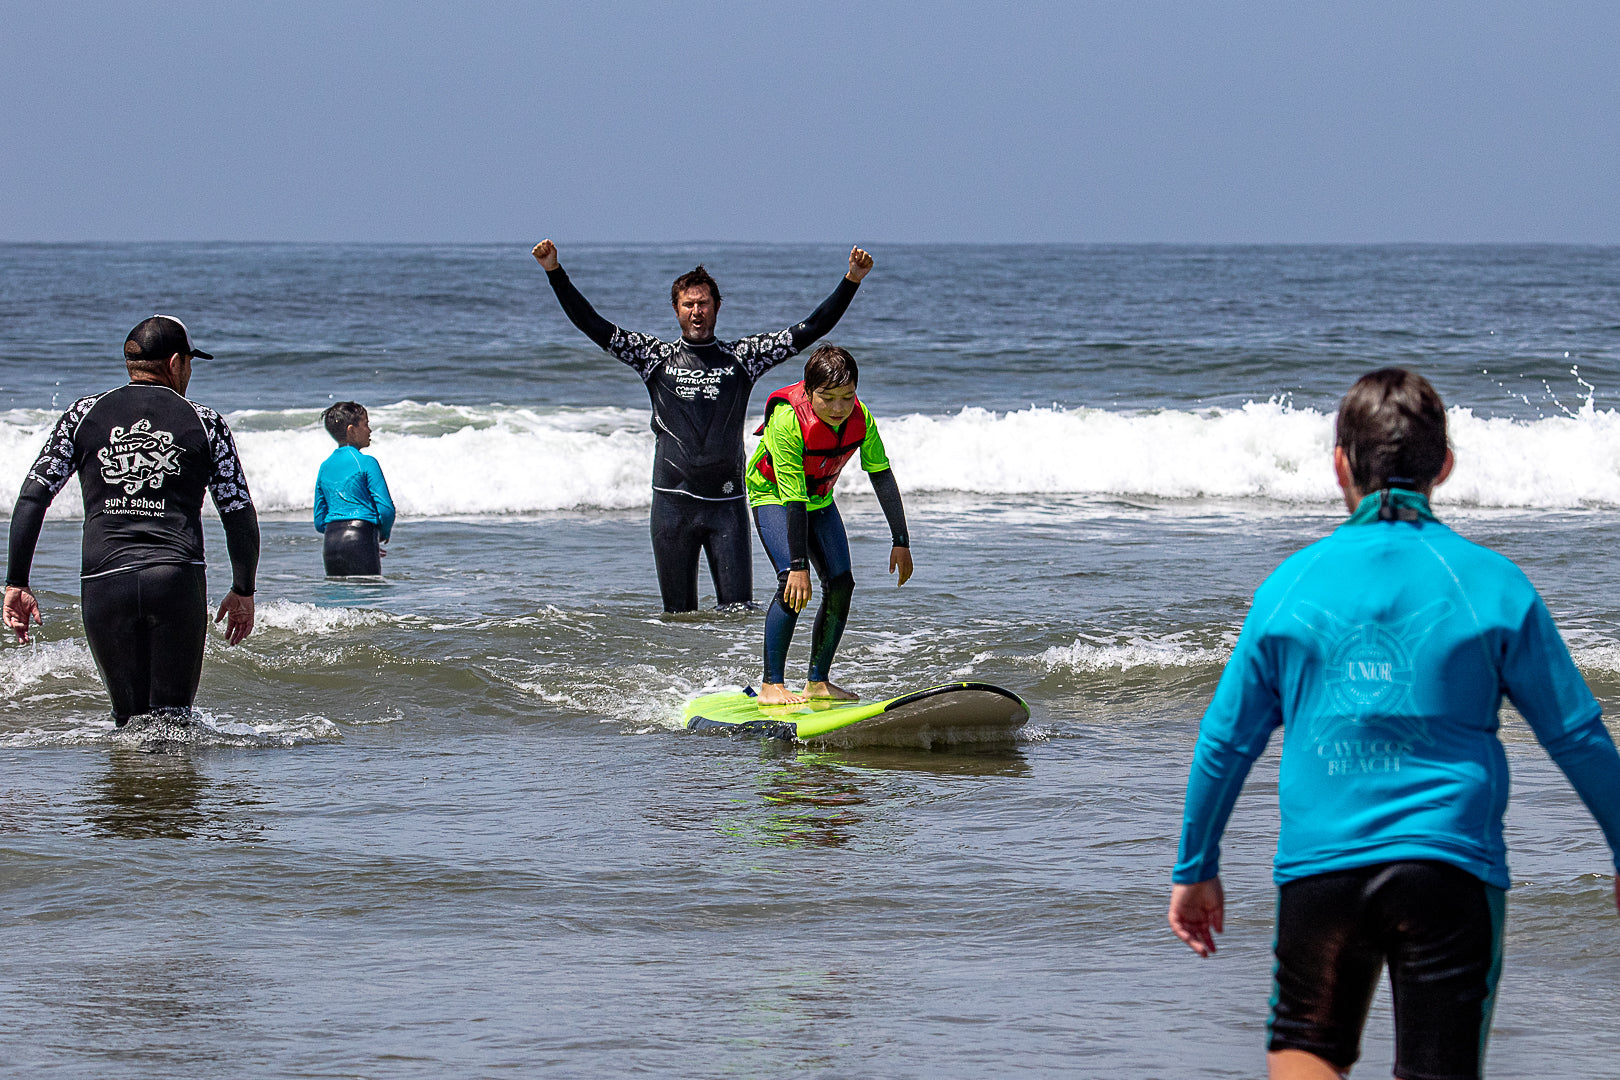 Indo Jax x TANDM Surf: Introducing Kids with Special Needs to the Joy of the Ocean